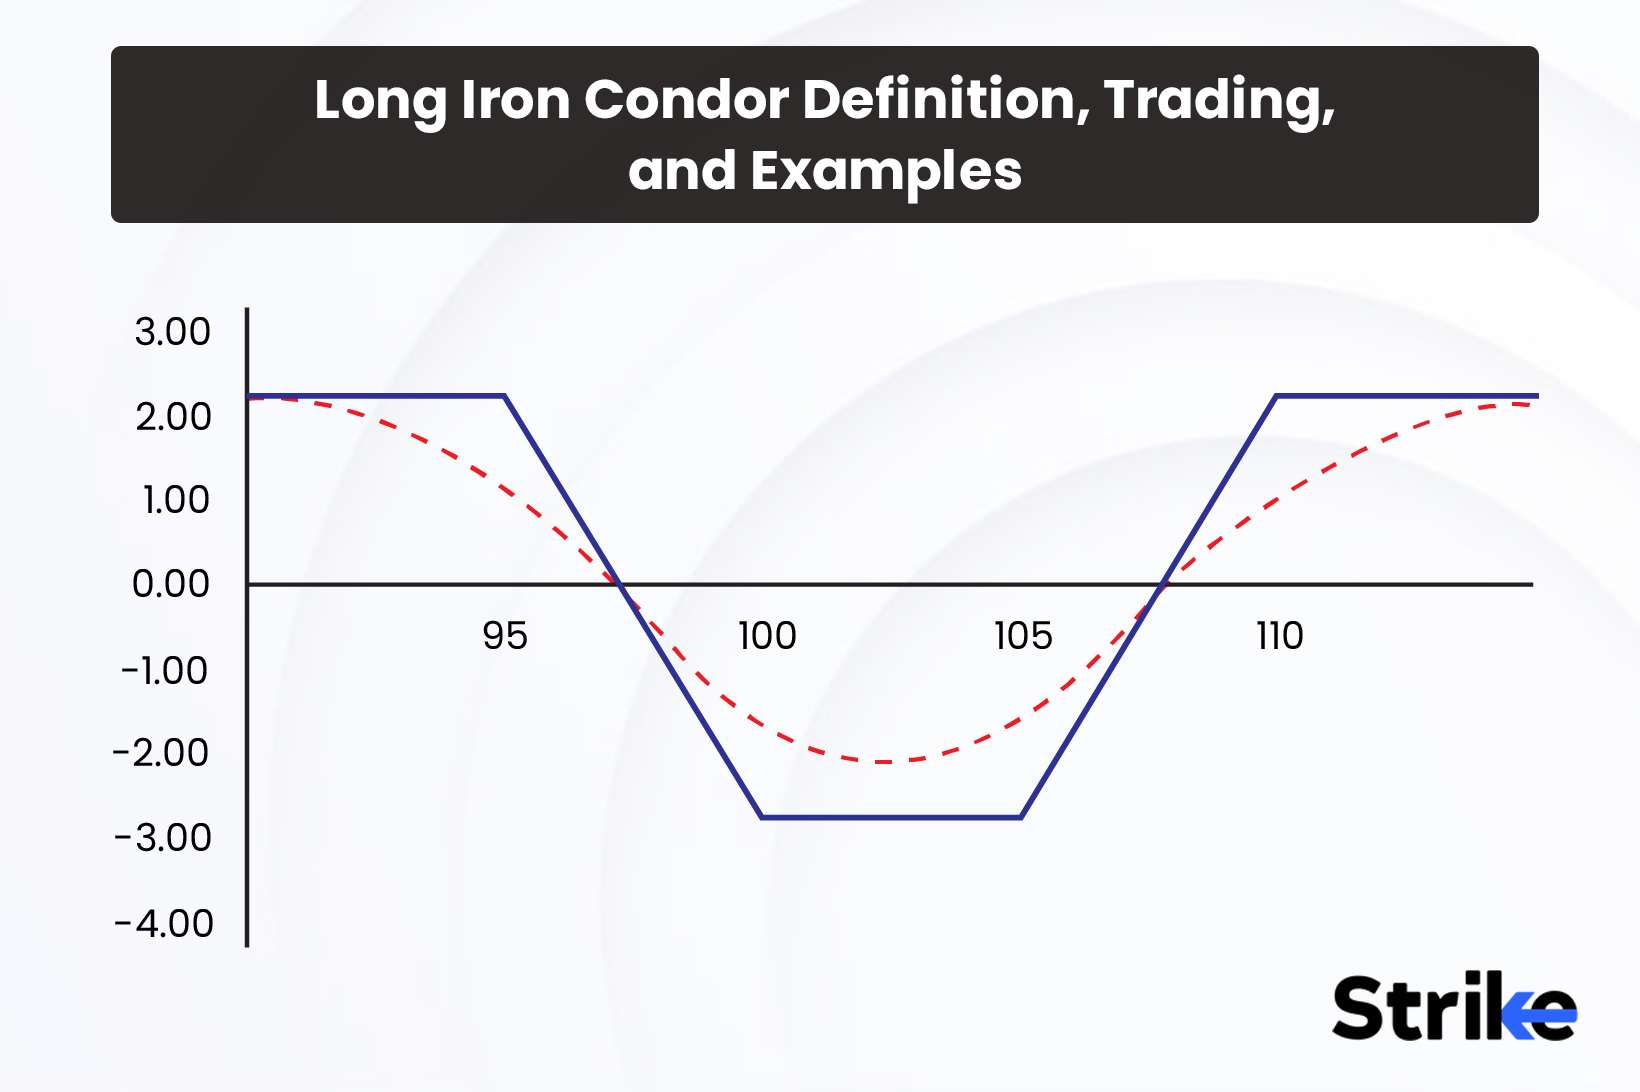 Long Iron Condor: Definition, Trading, and Examples